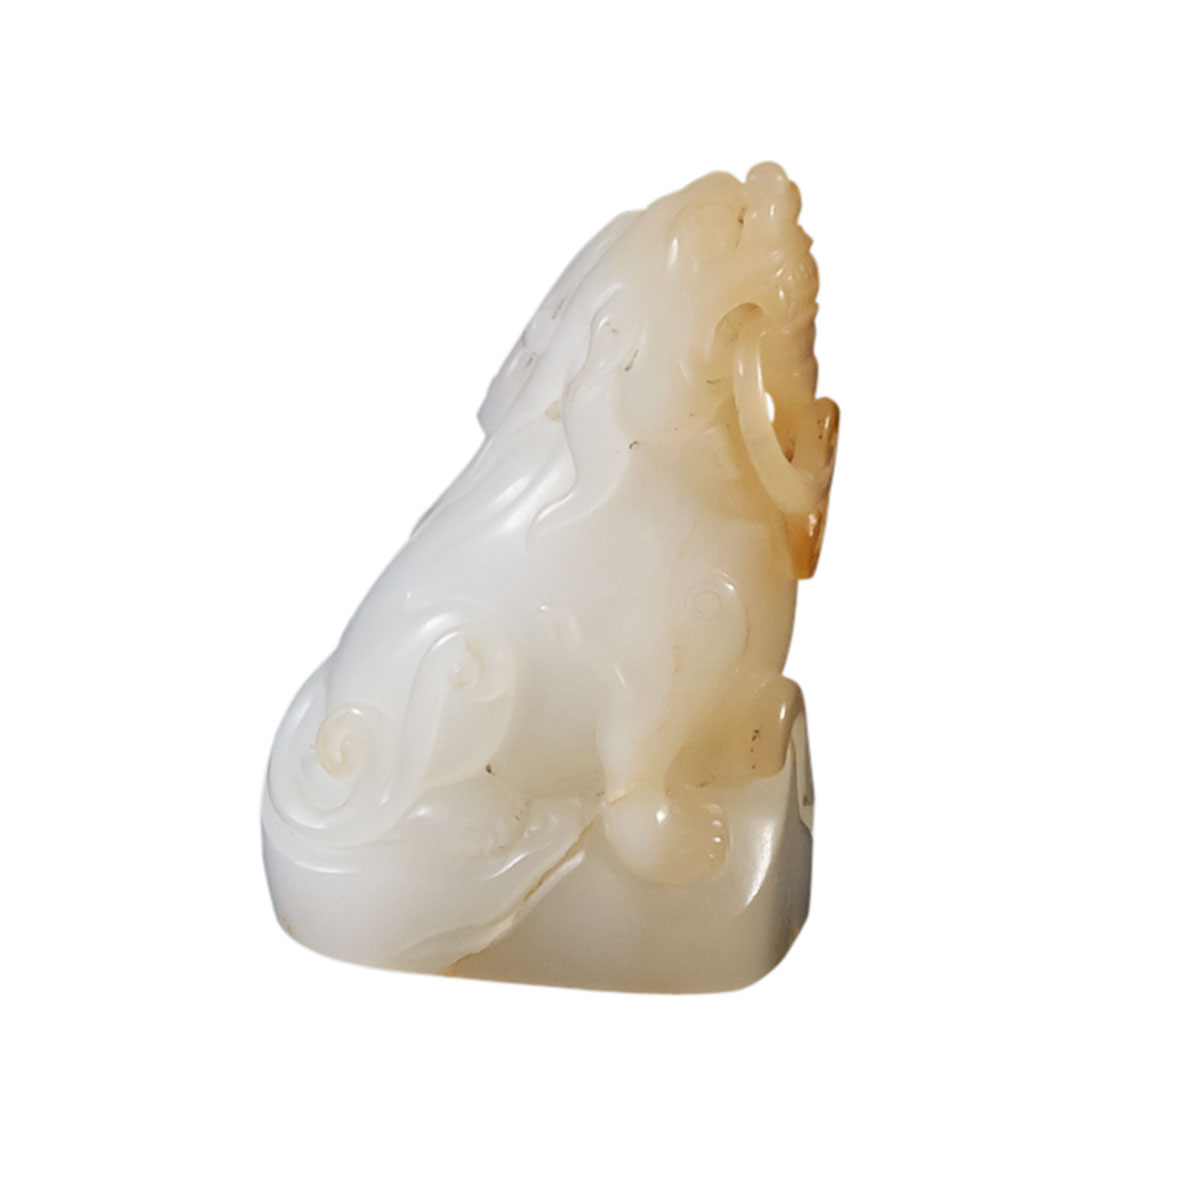 White Jade ‘Mythical Beast’ Seal, 19th Century or Earlier